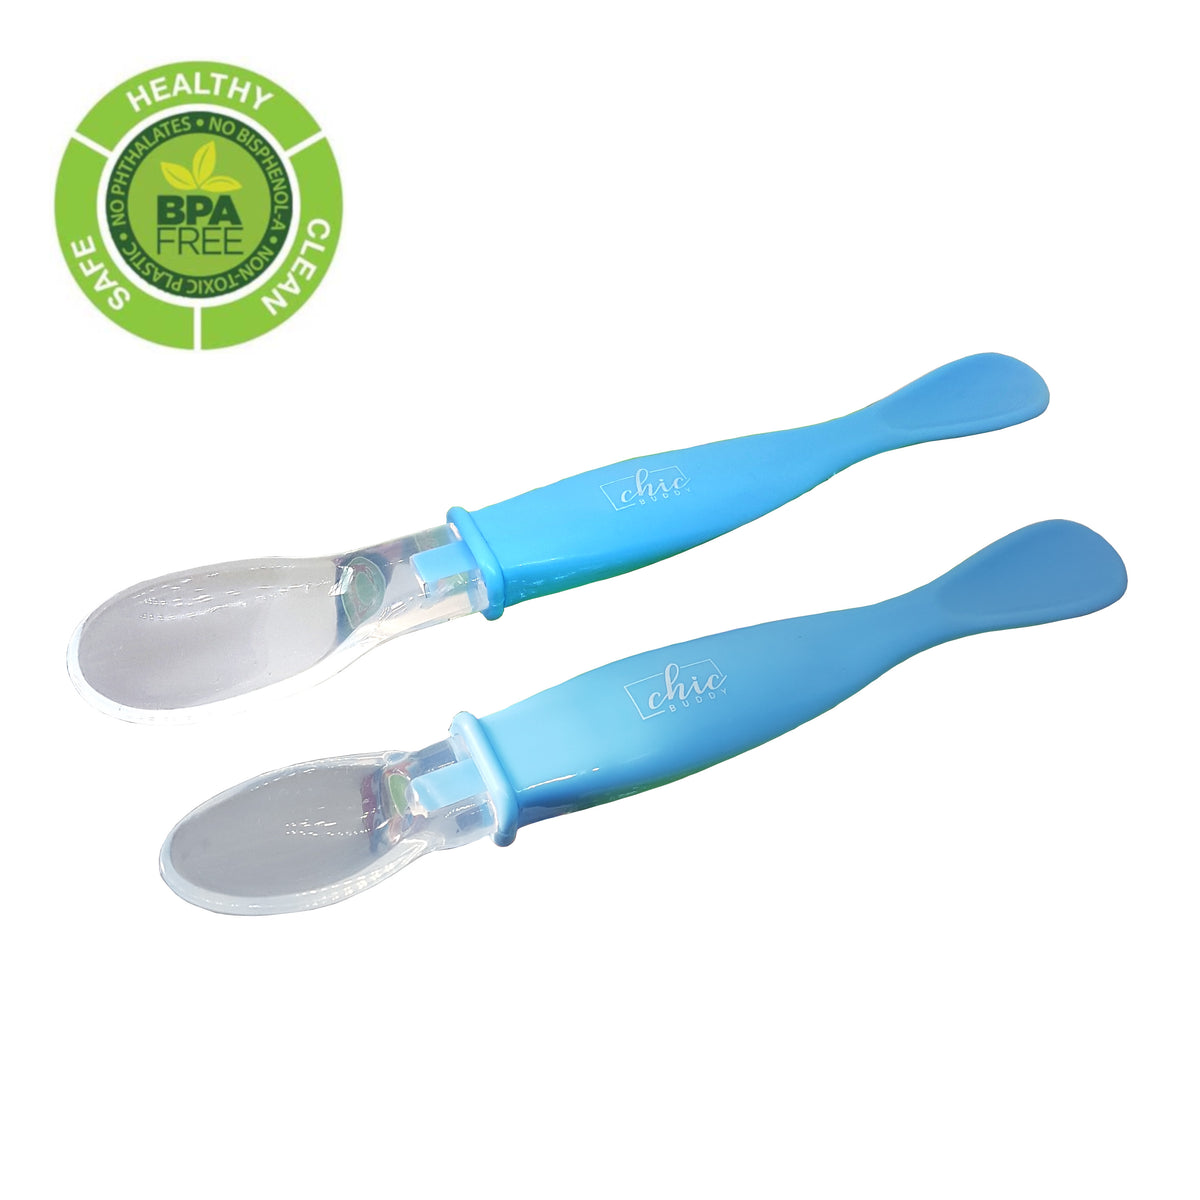  BabyBjörn Baby Spoon and Fork, 4 pcs, Powder Blue : Baby